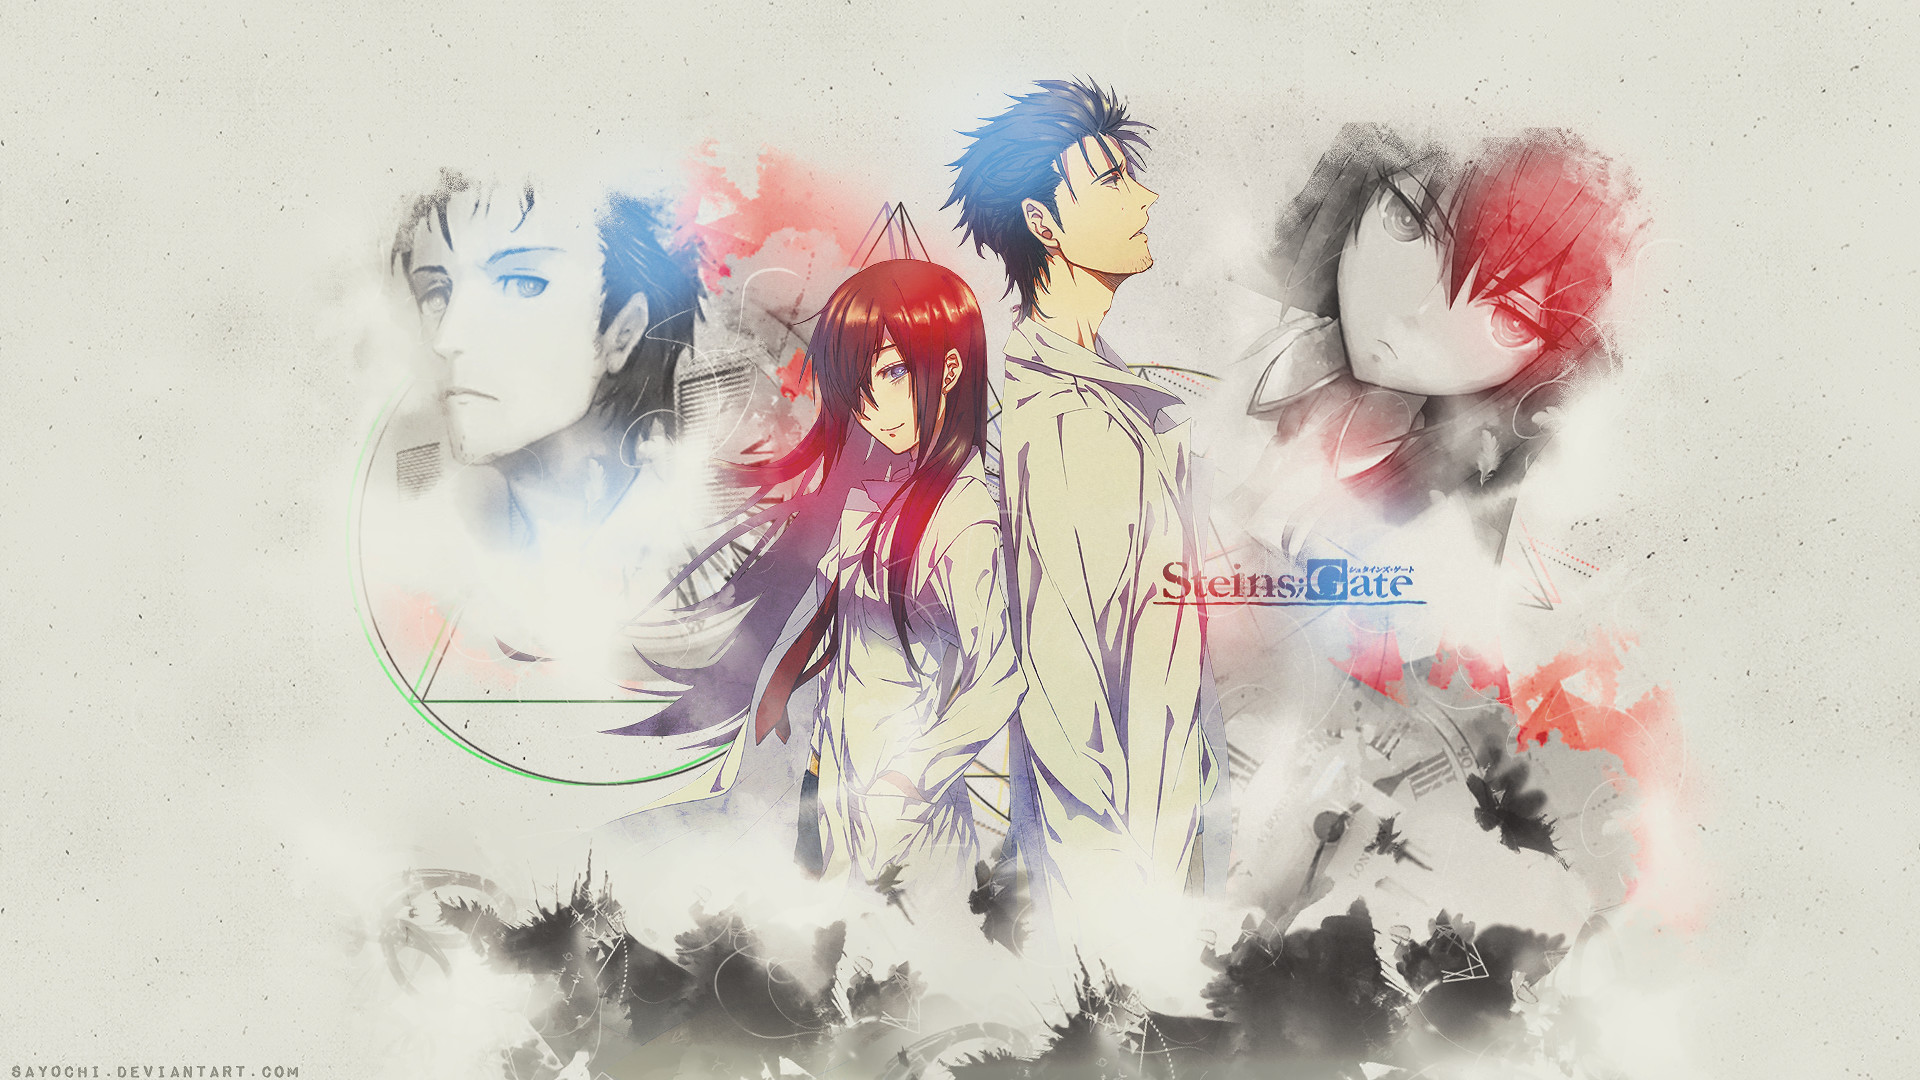 … Anime Steins Gate Wallpaper [1920×1080] HD by Say0chi